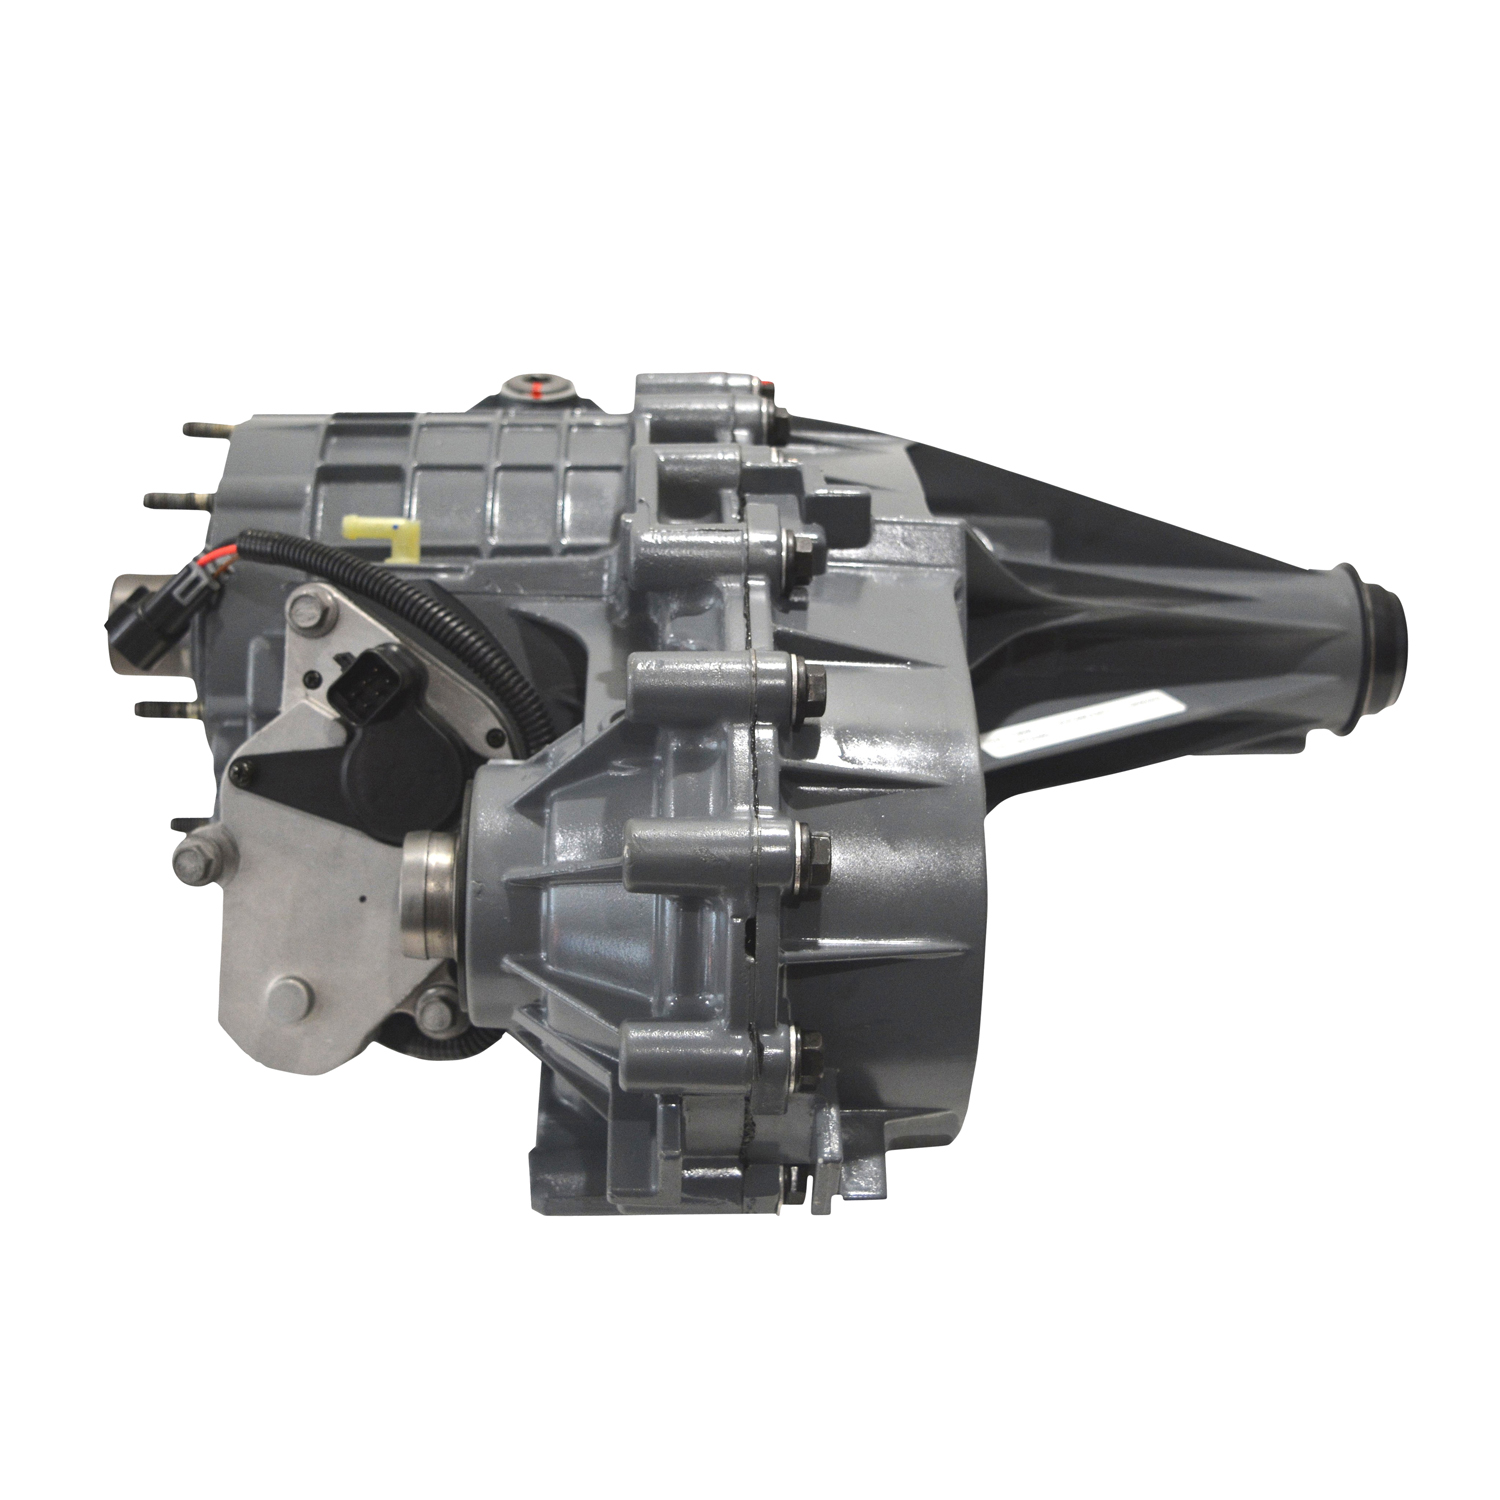 Transfer Case for 1999-2002 General Motors with 4L80E